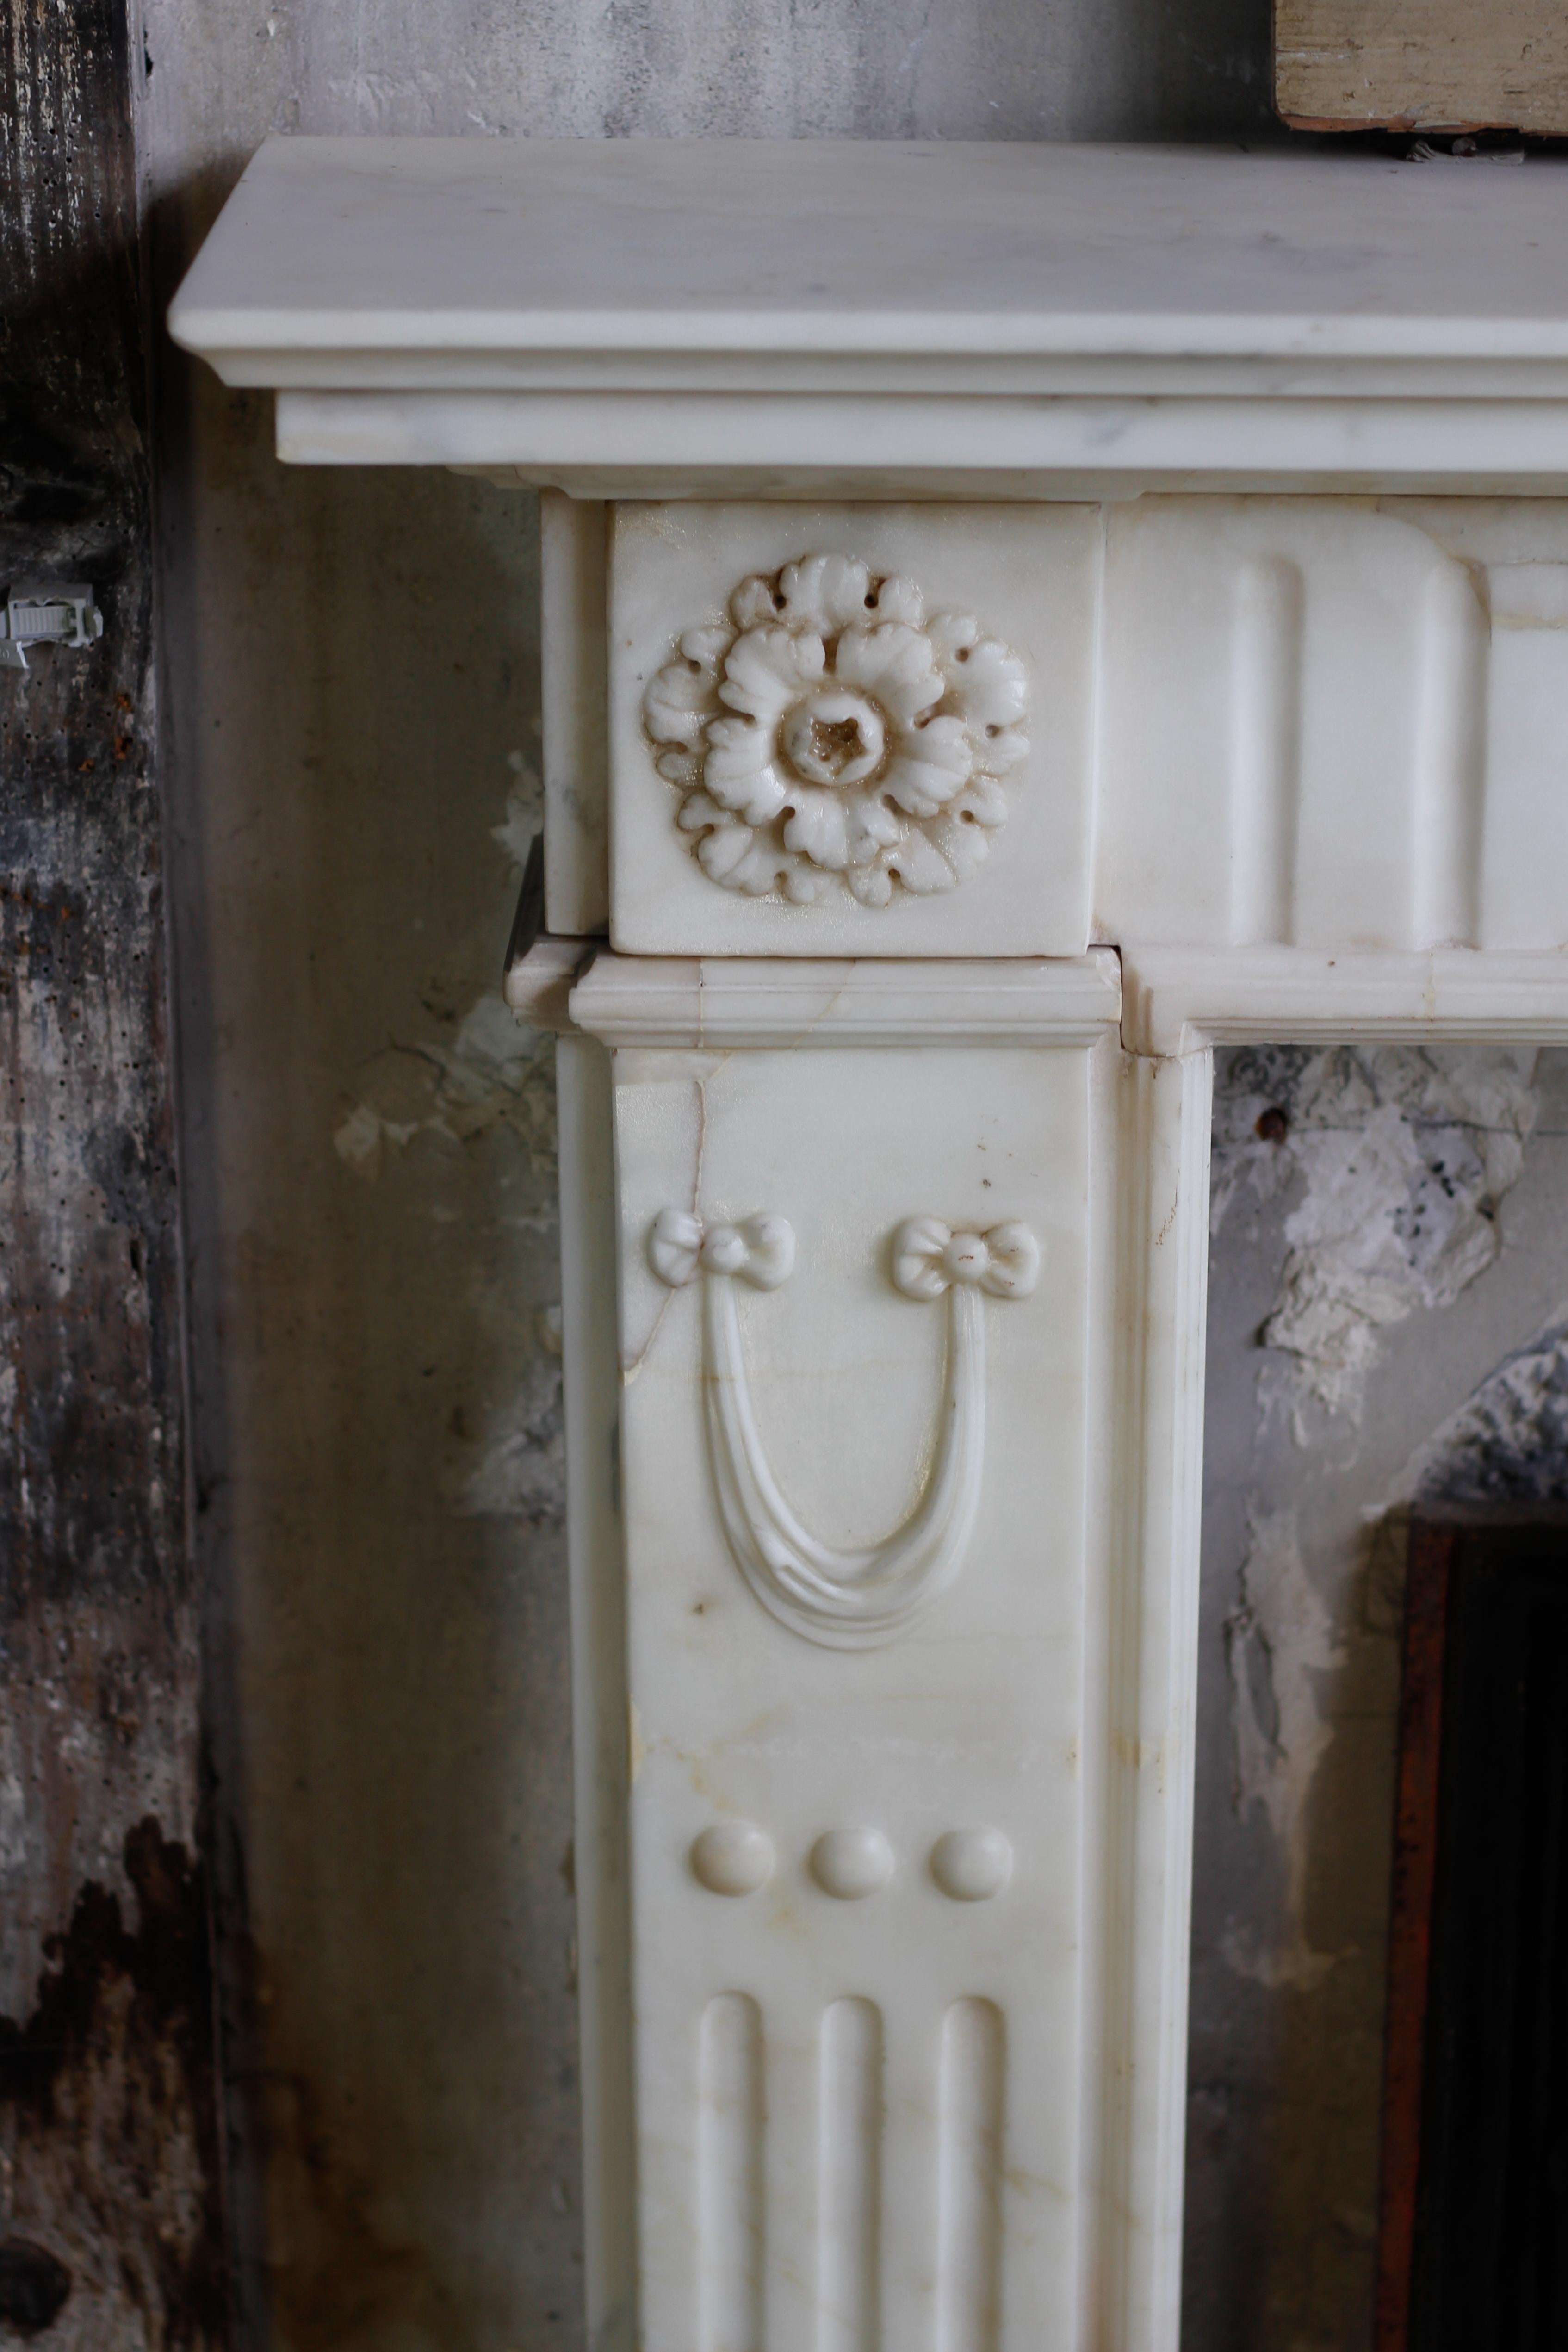 19th century English statuary marble fireplace mantel

This rare mantel was made during the 19th century and made out of a very white marble. The entablature is carved with fluting all along its length and two round rosettes decorate the